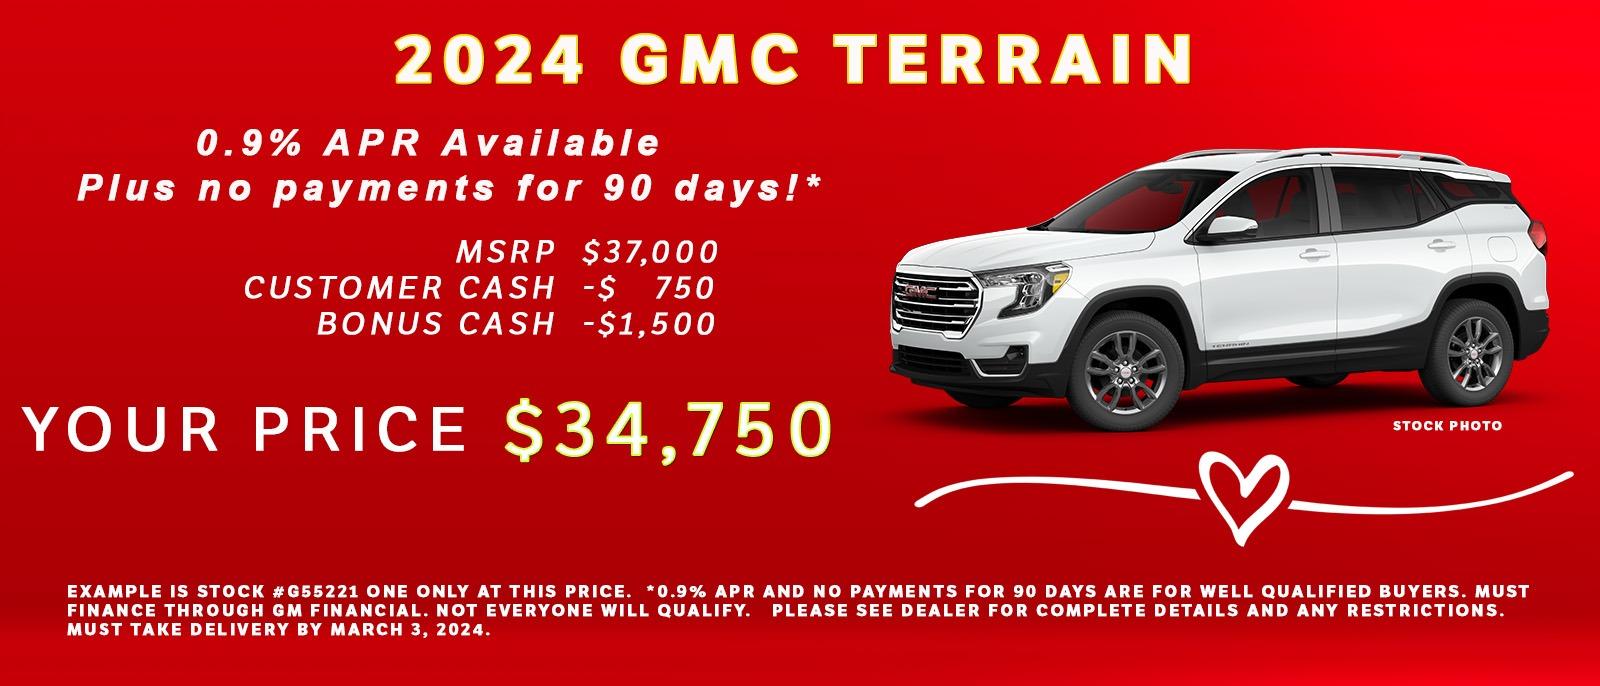 Get your new 2024 GMC Terrain for a low price now